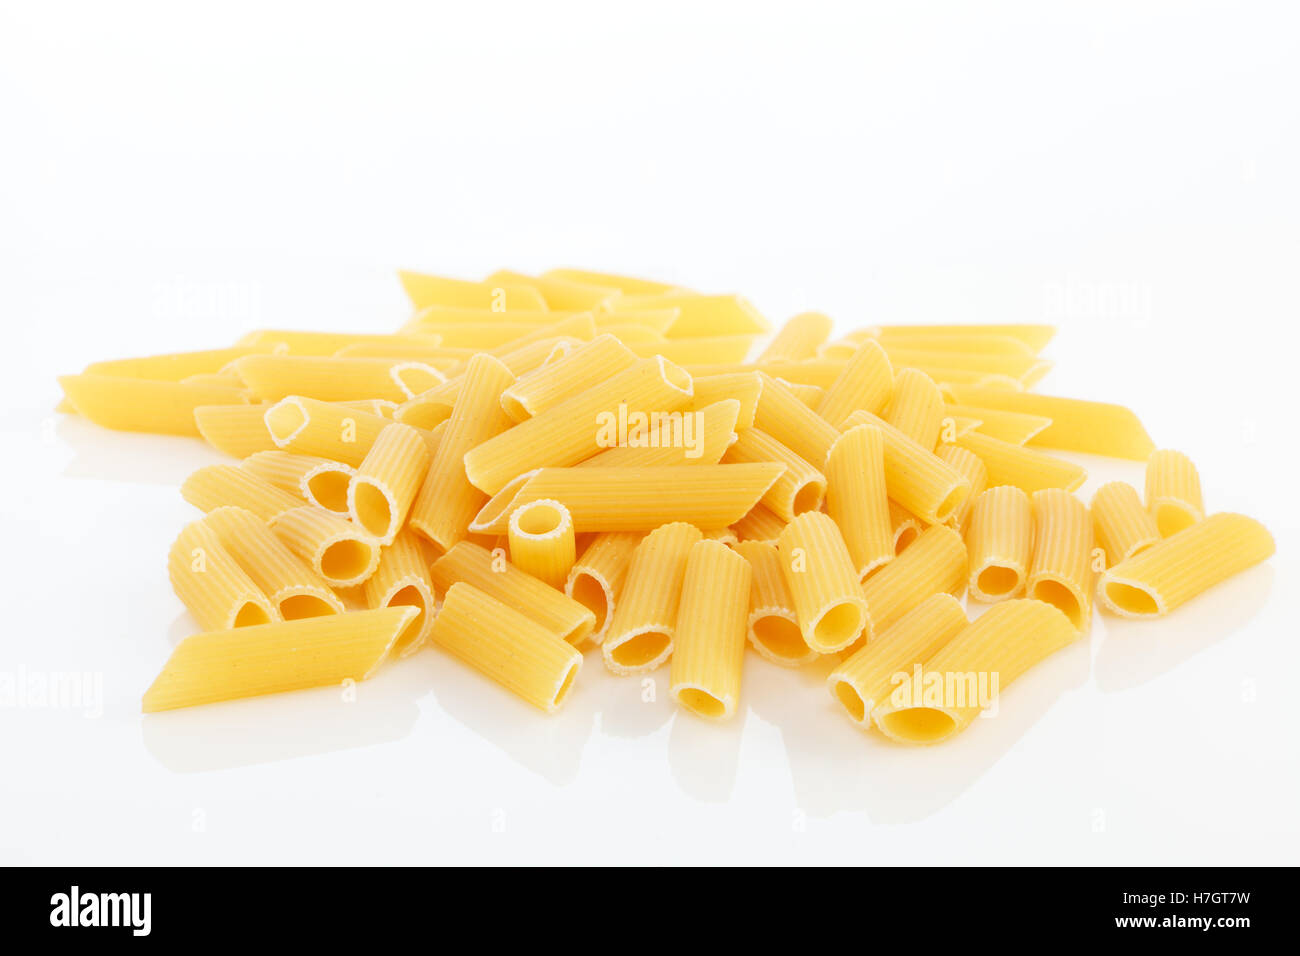 Penne Rigate Texture stock photo. Image of life, item, diet - 385682